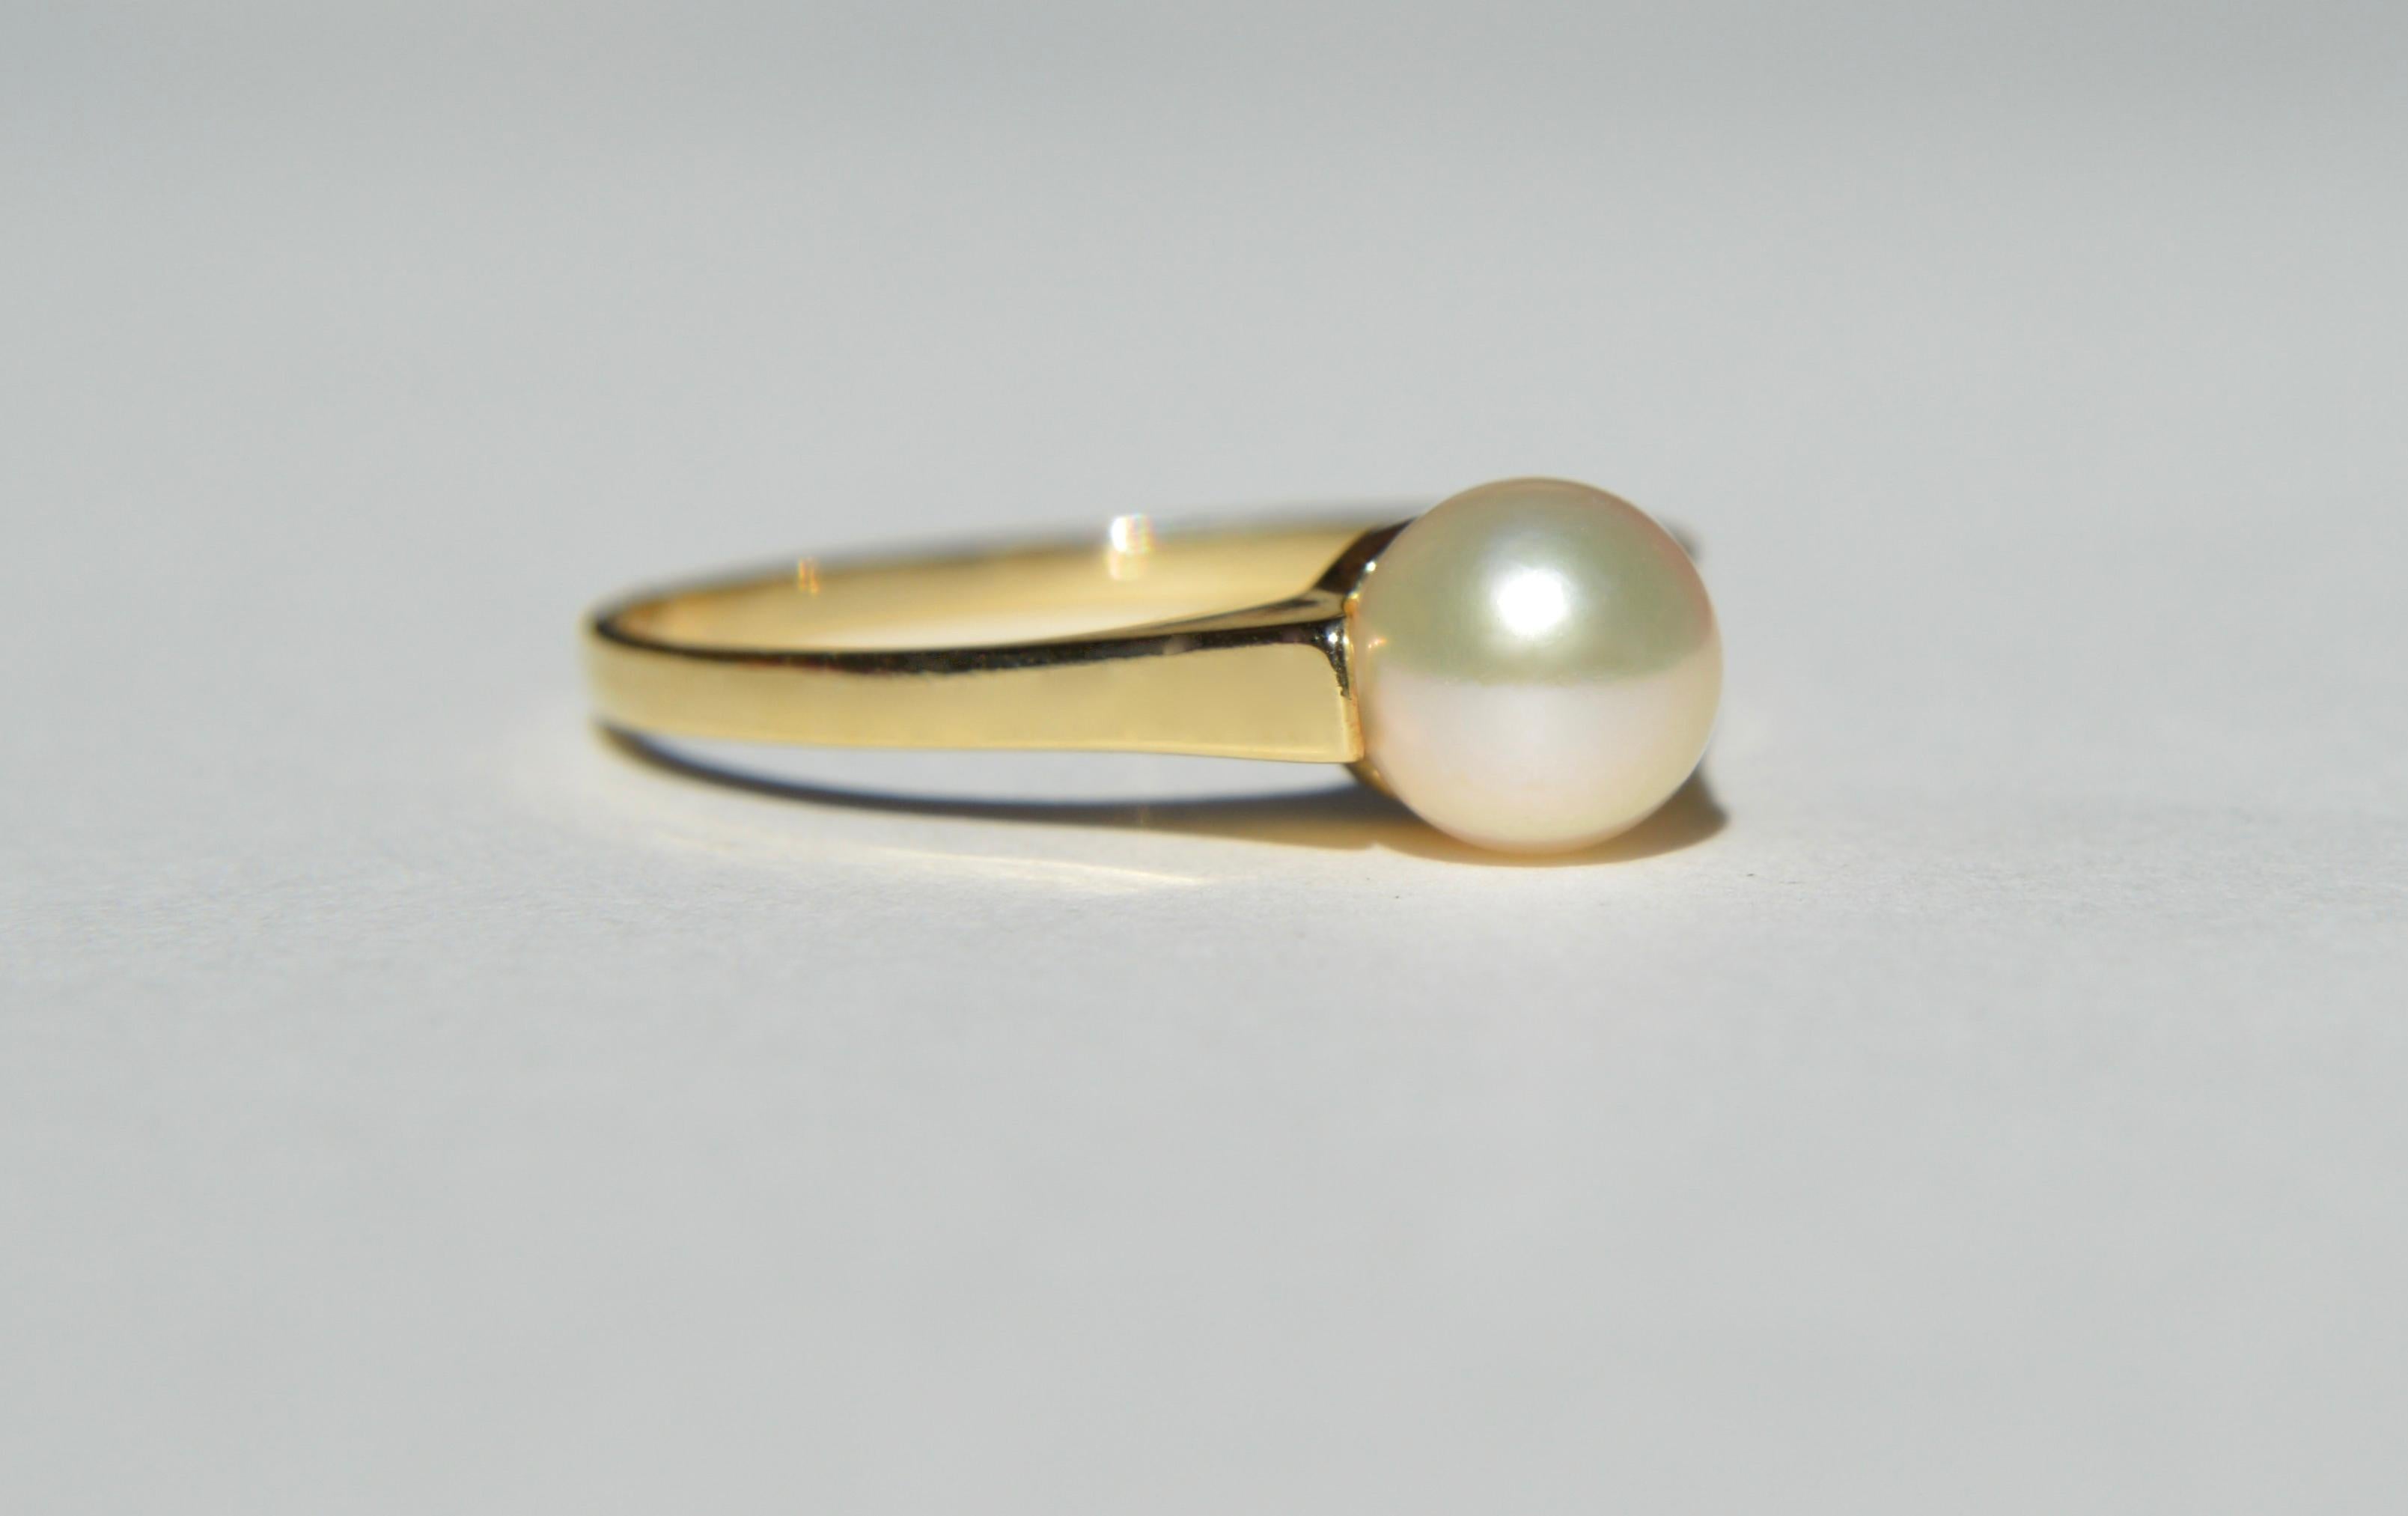 Vintage Midcentury era c1960s Akoya pearl 14K yellow gold solitaire ring. Size 7.25, can be resized by a jeweler. Marked as 585 for 14K gold. In excellent condition. Ring weighs 1.61 grams. Pearl measures 6mm in diameter and has a creamy, off white